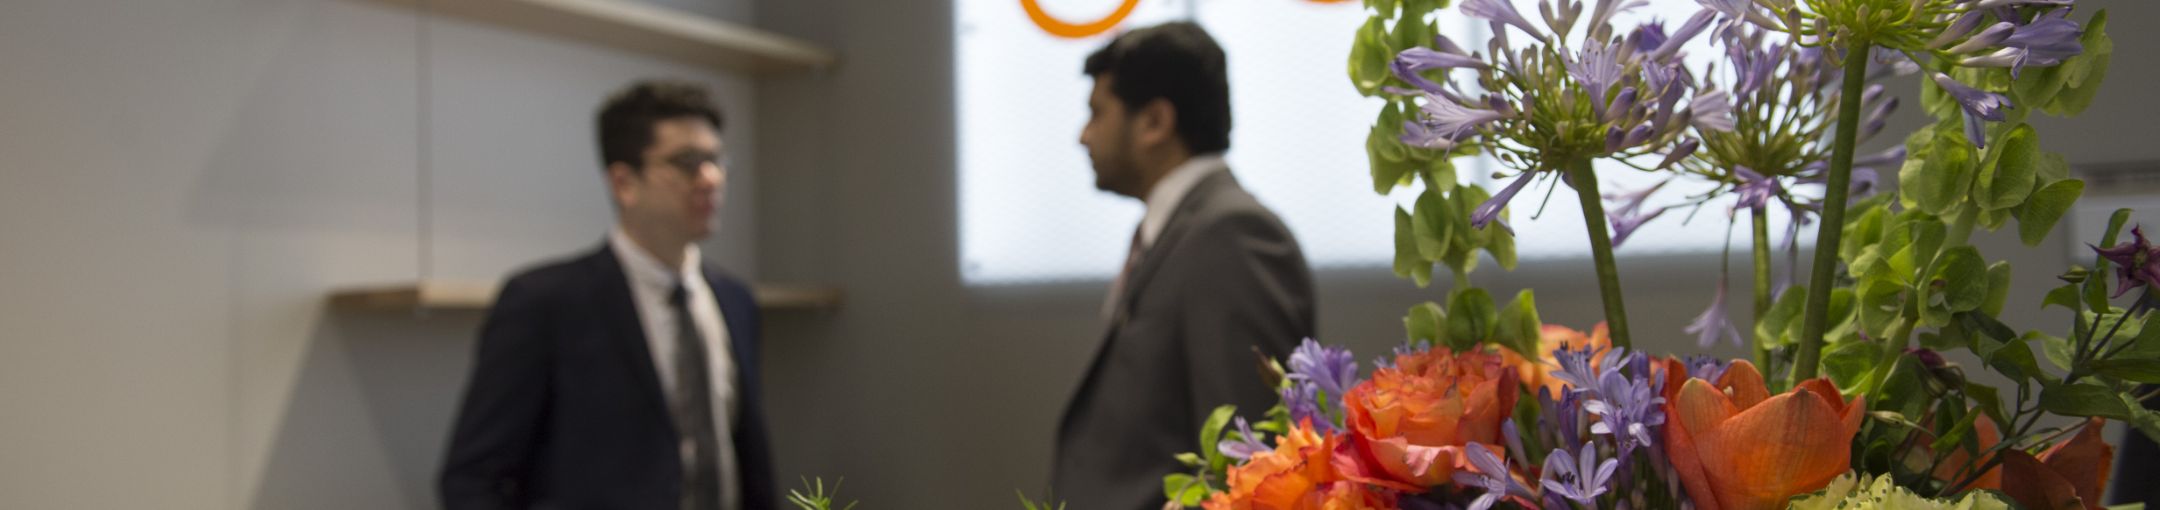 Two blury individuals standing and talking with an in-focus flower bouquet in the foreground 